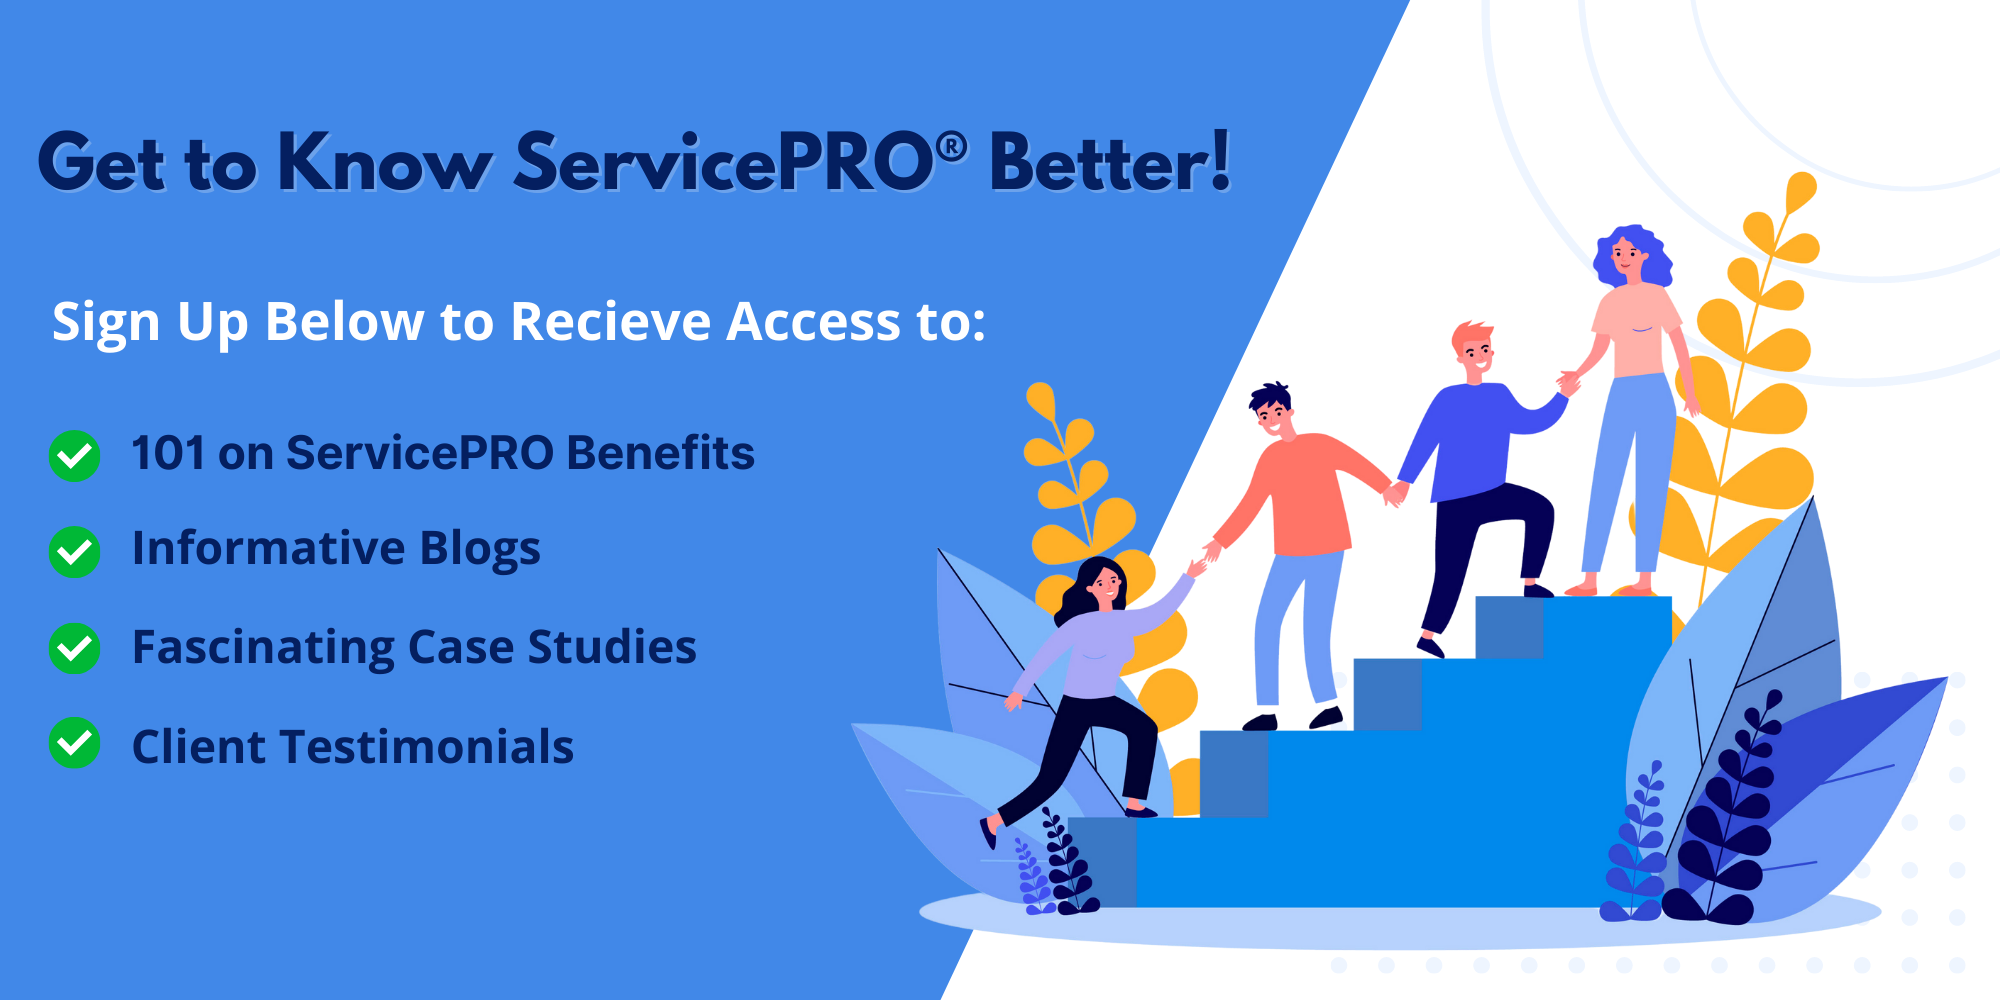 Sign up to know better about ServicePRO